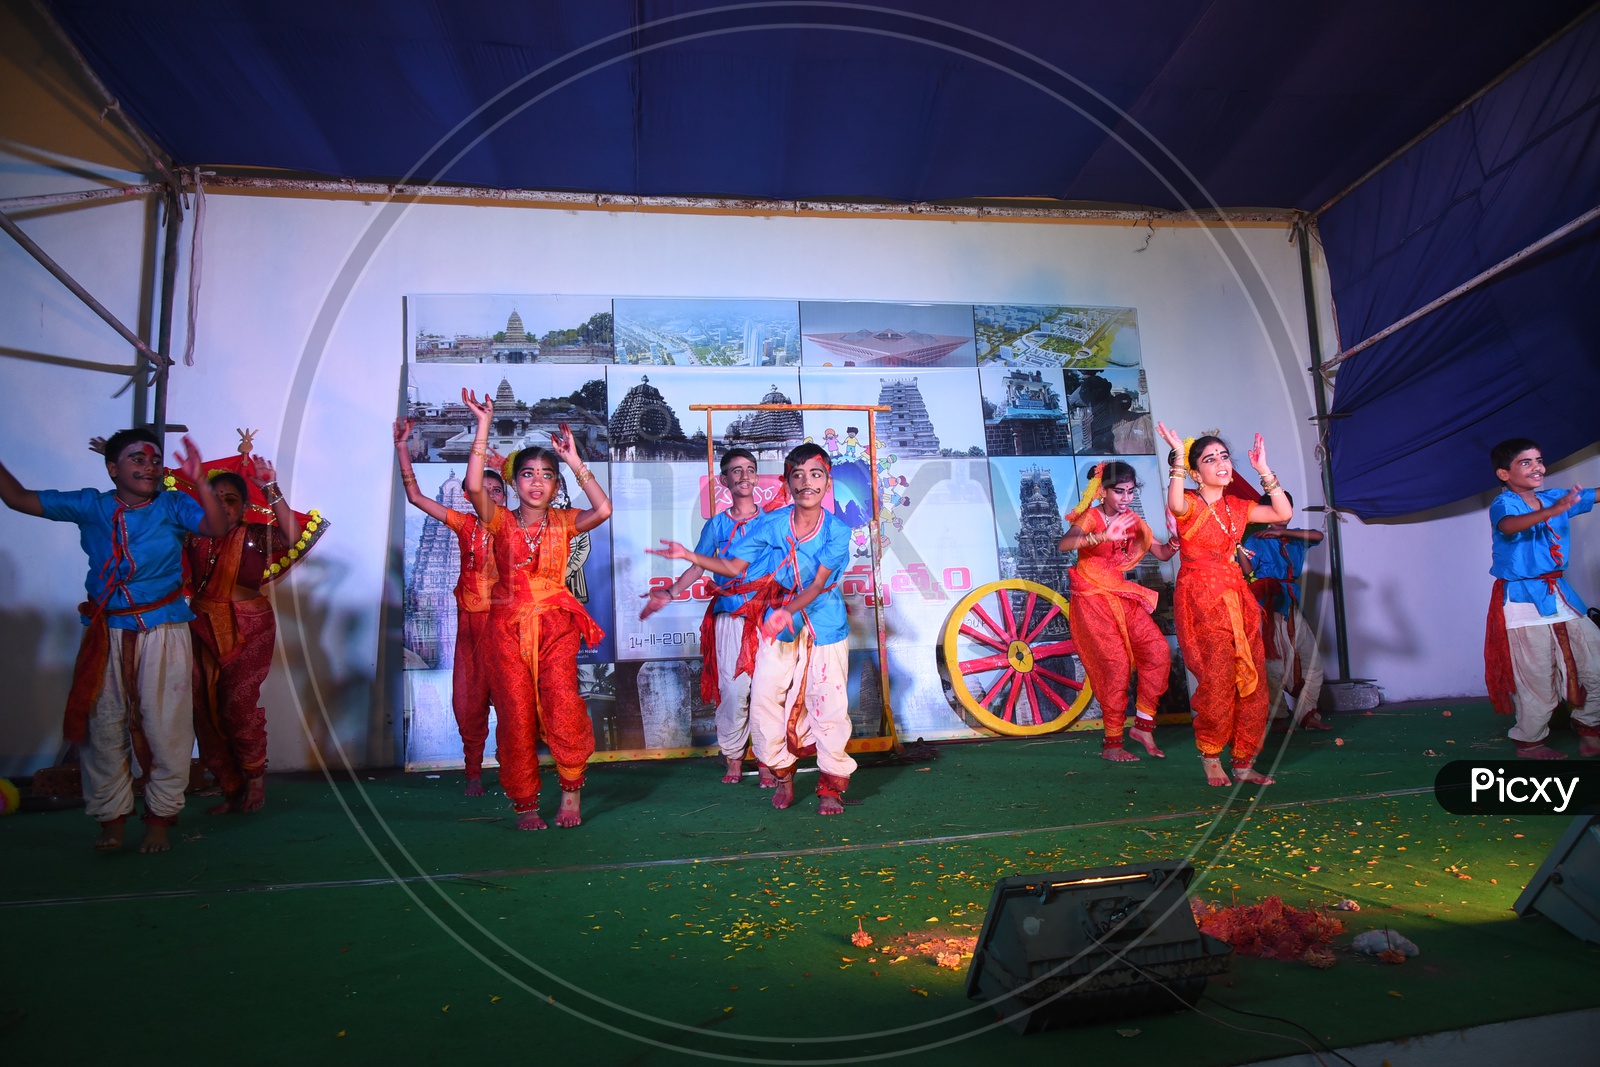 Students Performing On Stage in Event